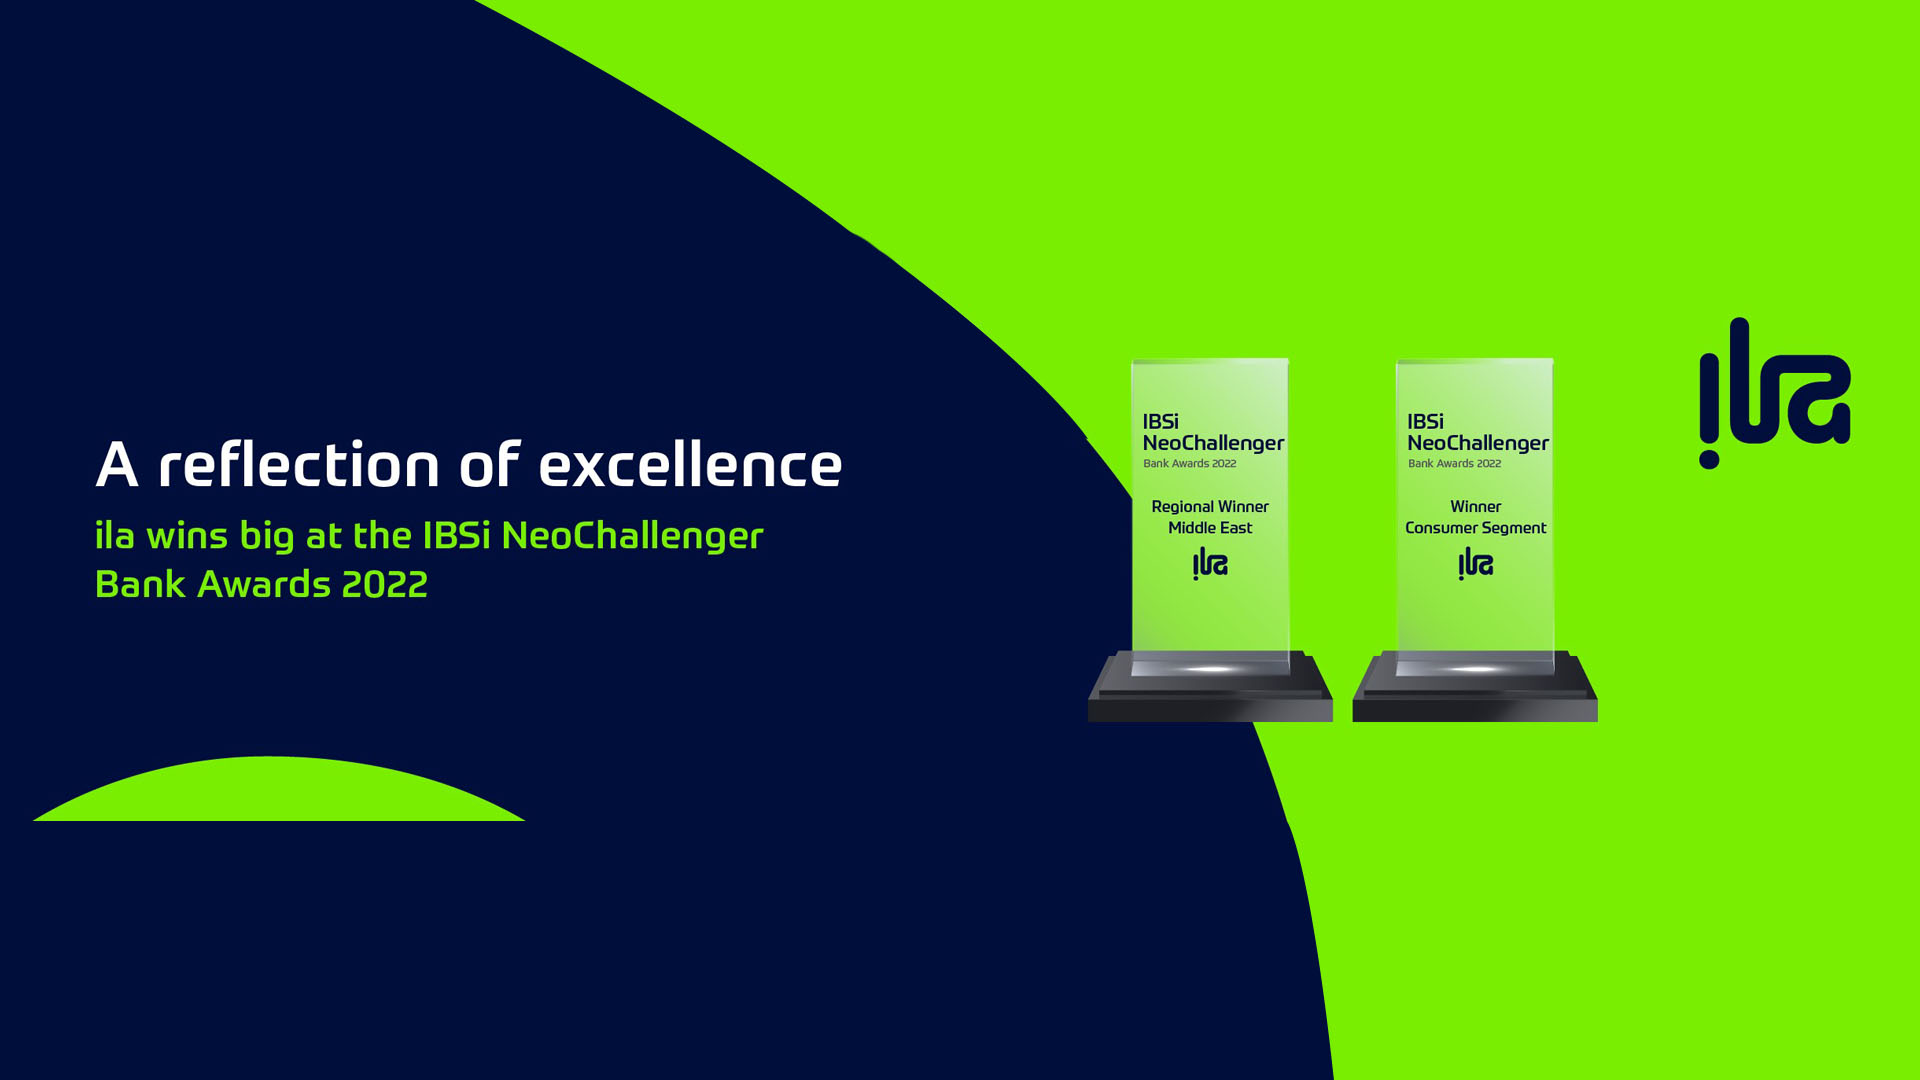 ila Bank named the ‘Leading Digital Bank’ in the Middle East and Consumer Banking Segment at the IBSi NeoChallenger Bank Awards 2022